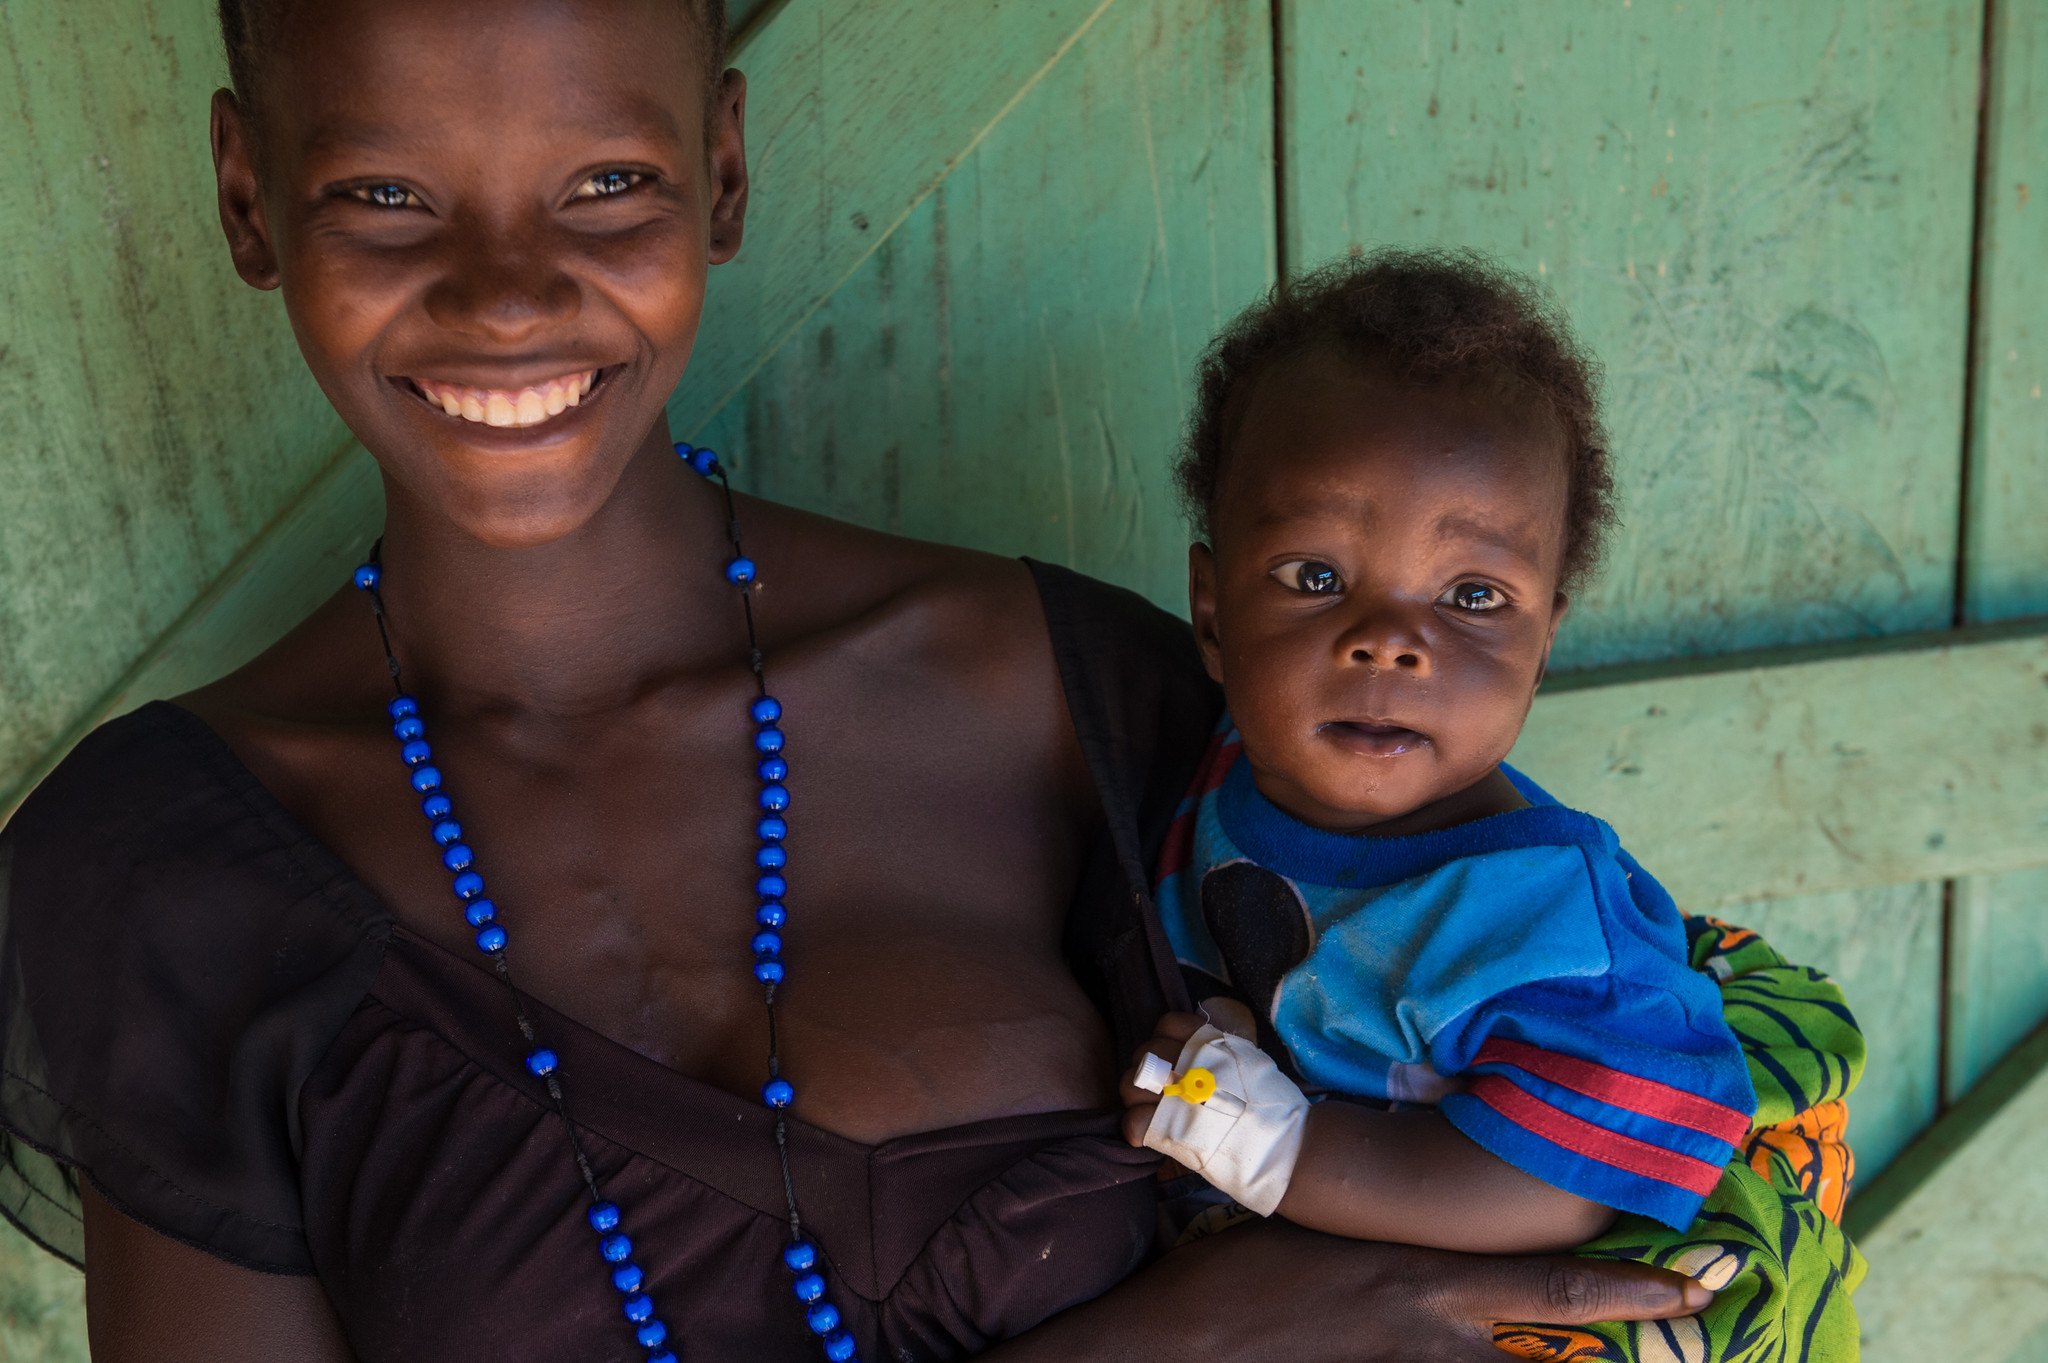 Mother and child in south sudan